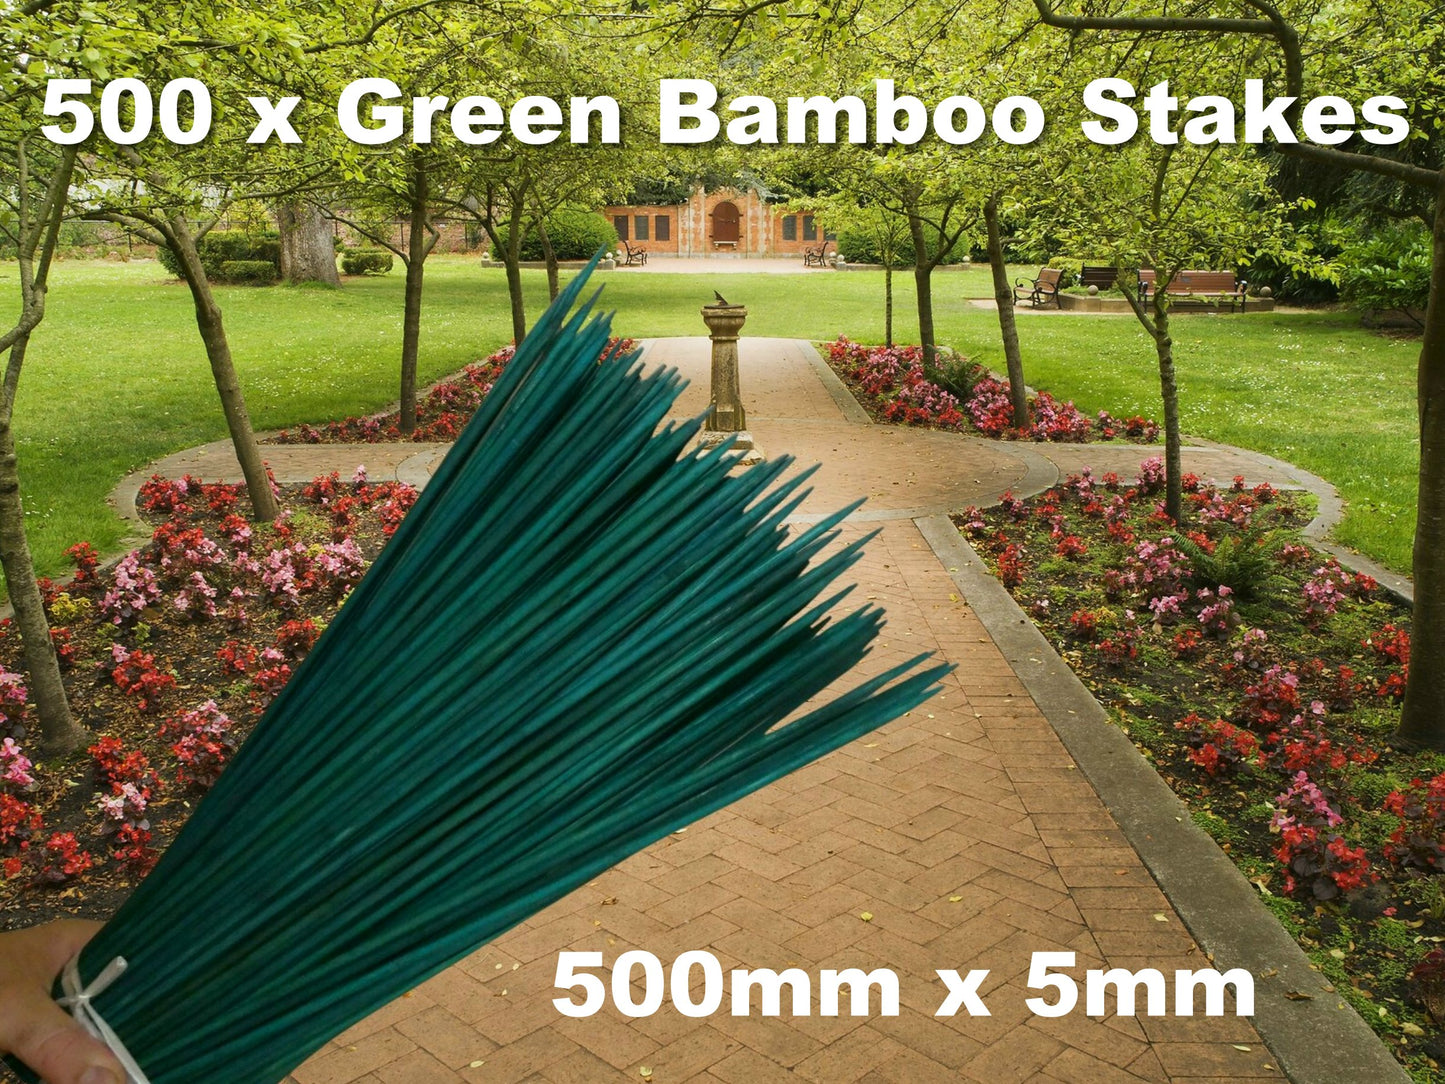 Garden skewers 500mm x 5mm Bamboo Seedling Sticks Stakes Green Waxed 500 Pieces